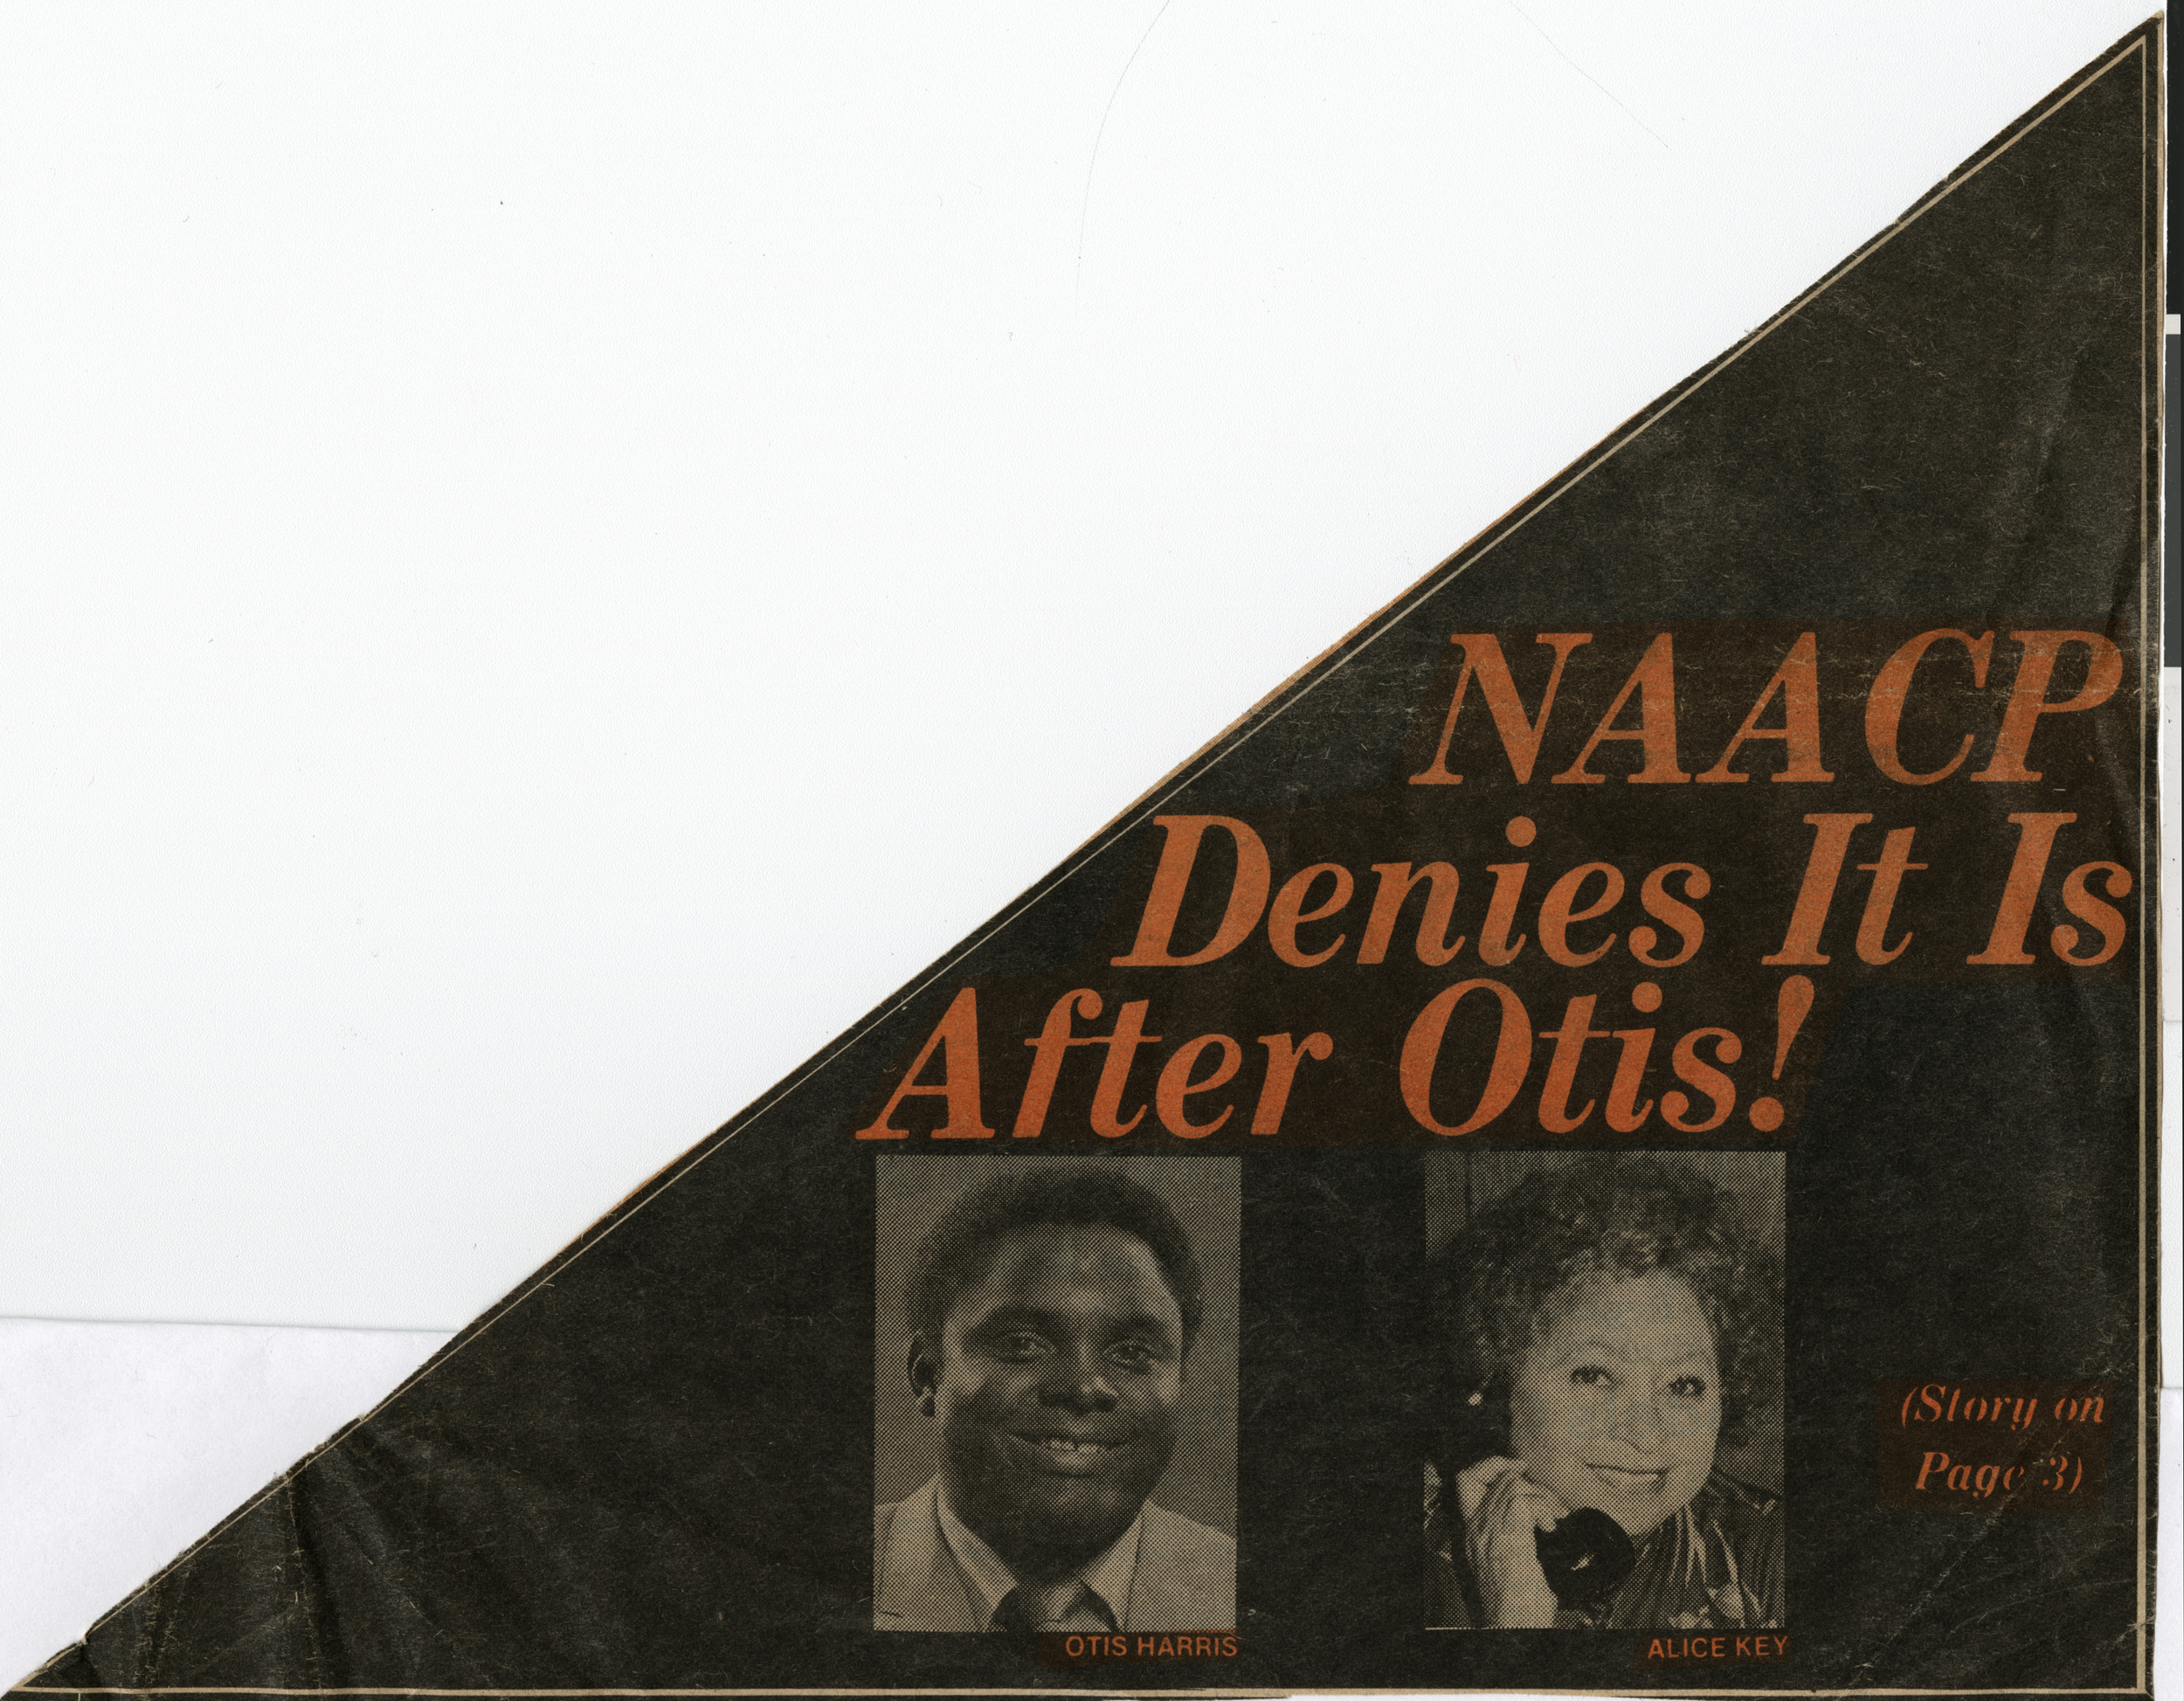 Newspaper clipping, NAACP Denies It Is After Otis, publication unknown, no date